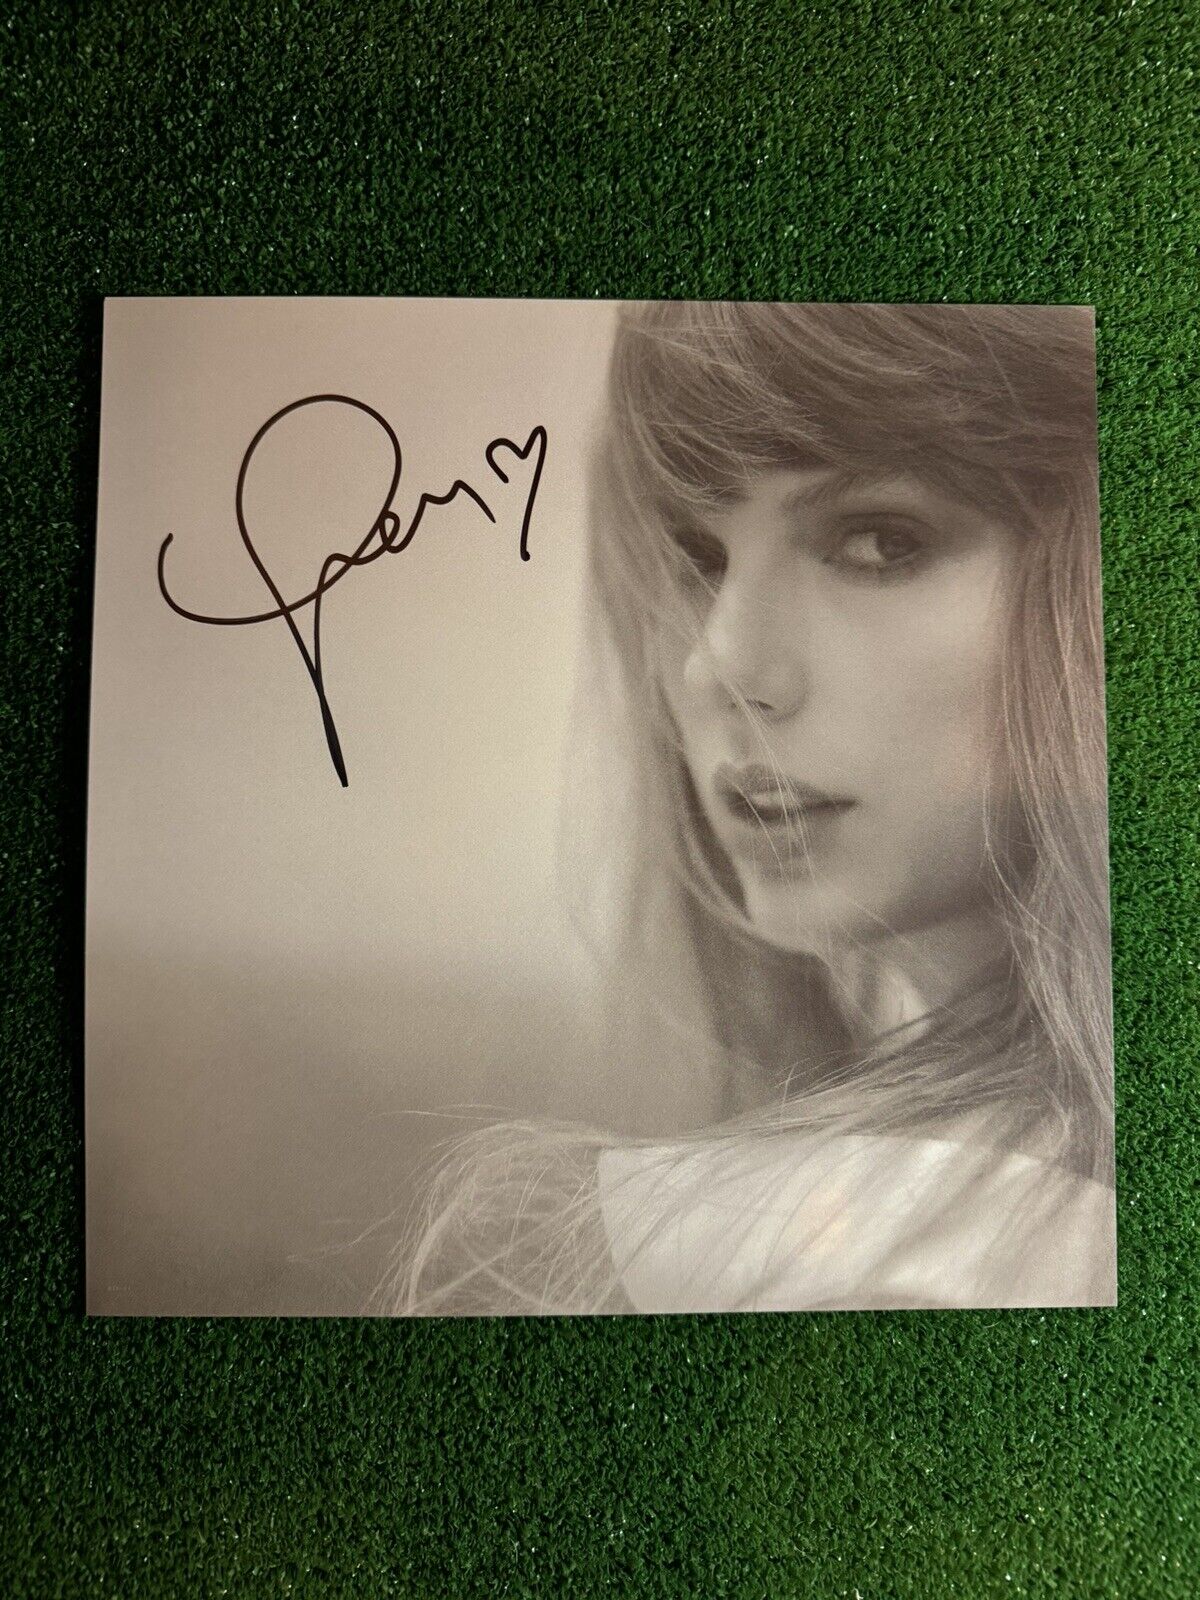 Taylor Swift The Tortured Poets Department Vinyl With Hand Signed Photo W/ HEART